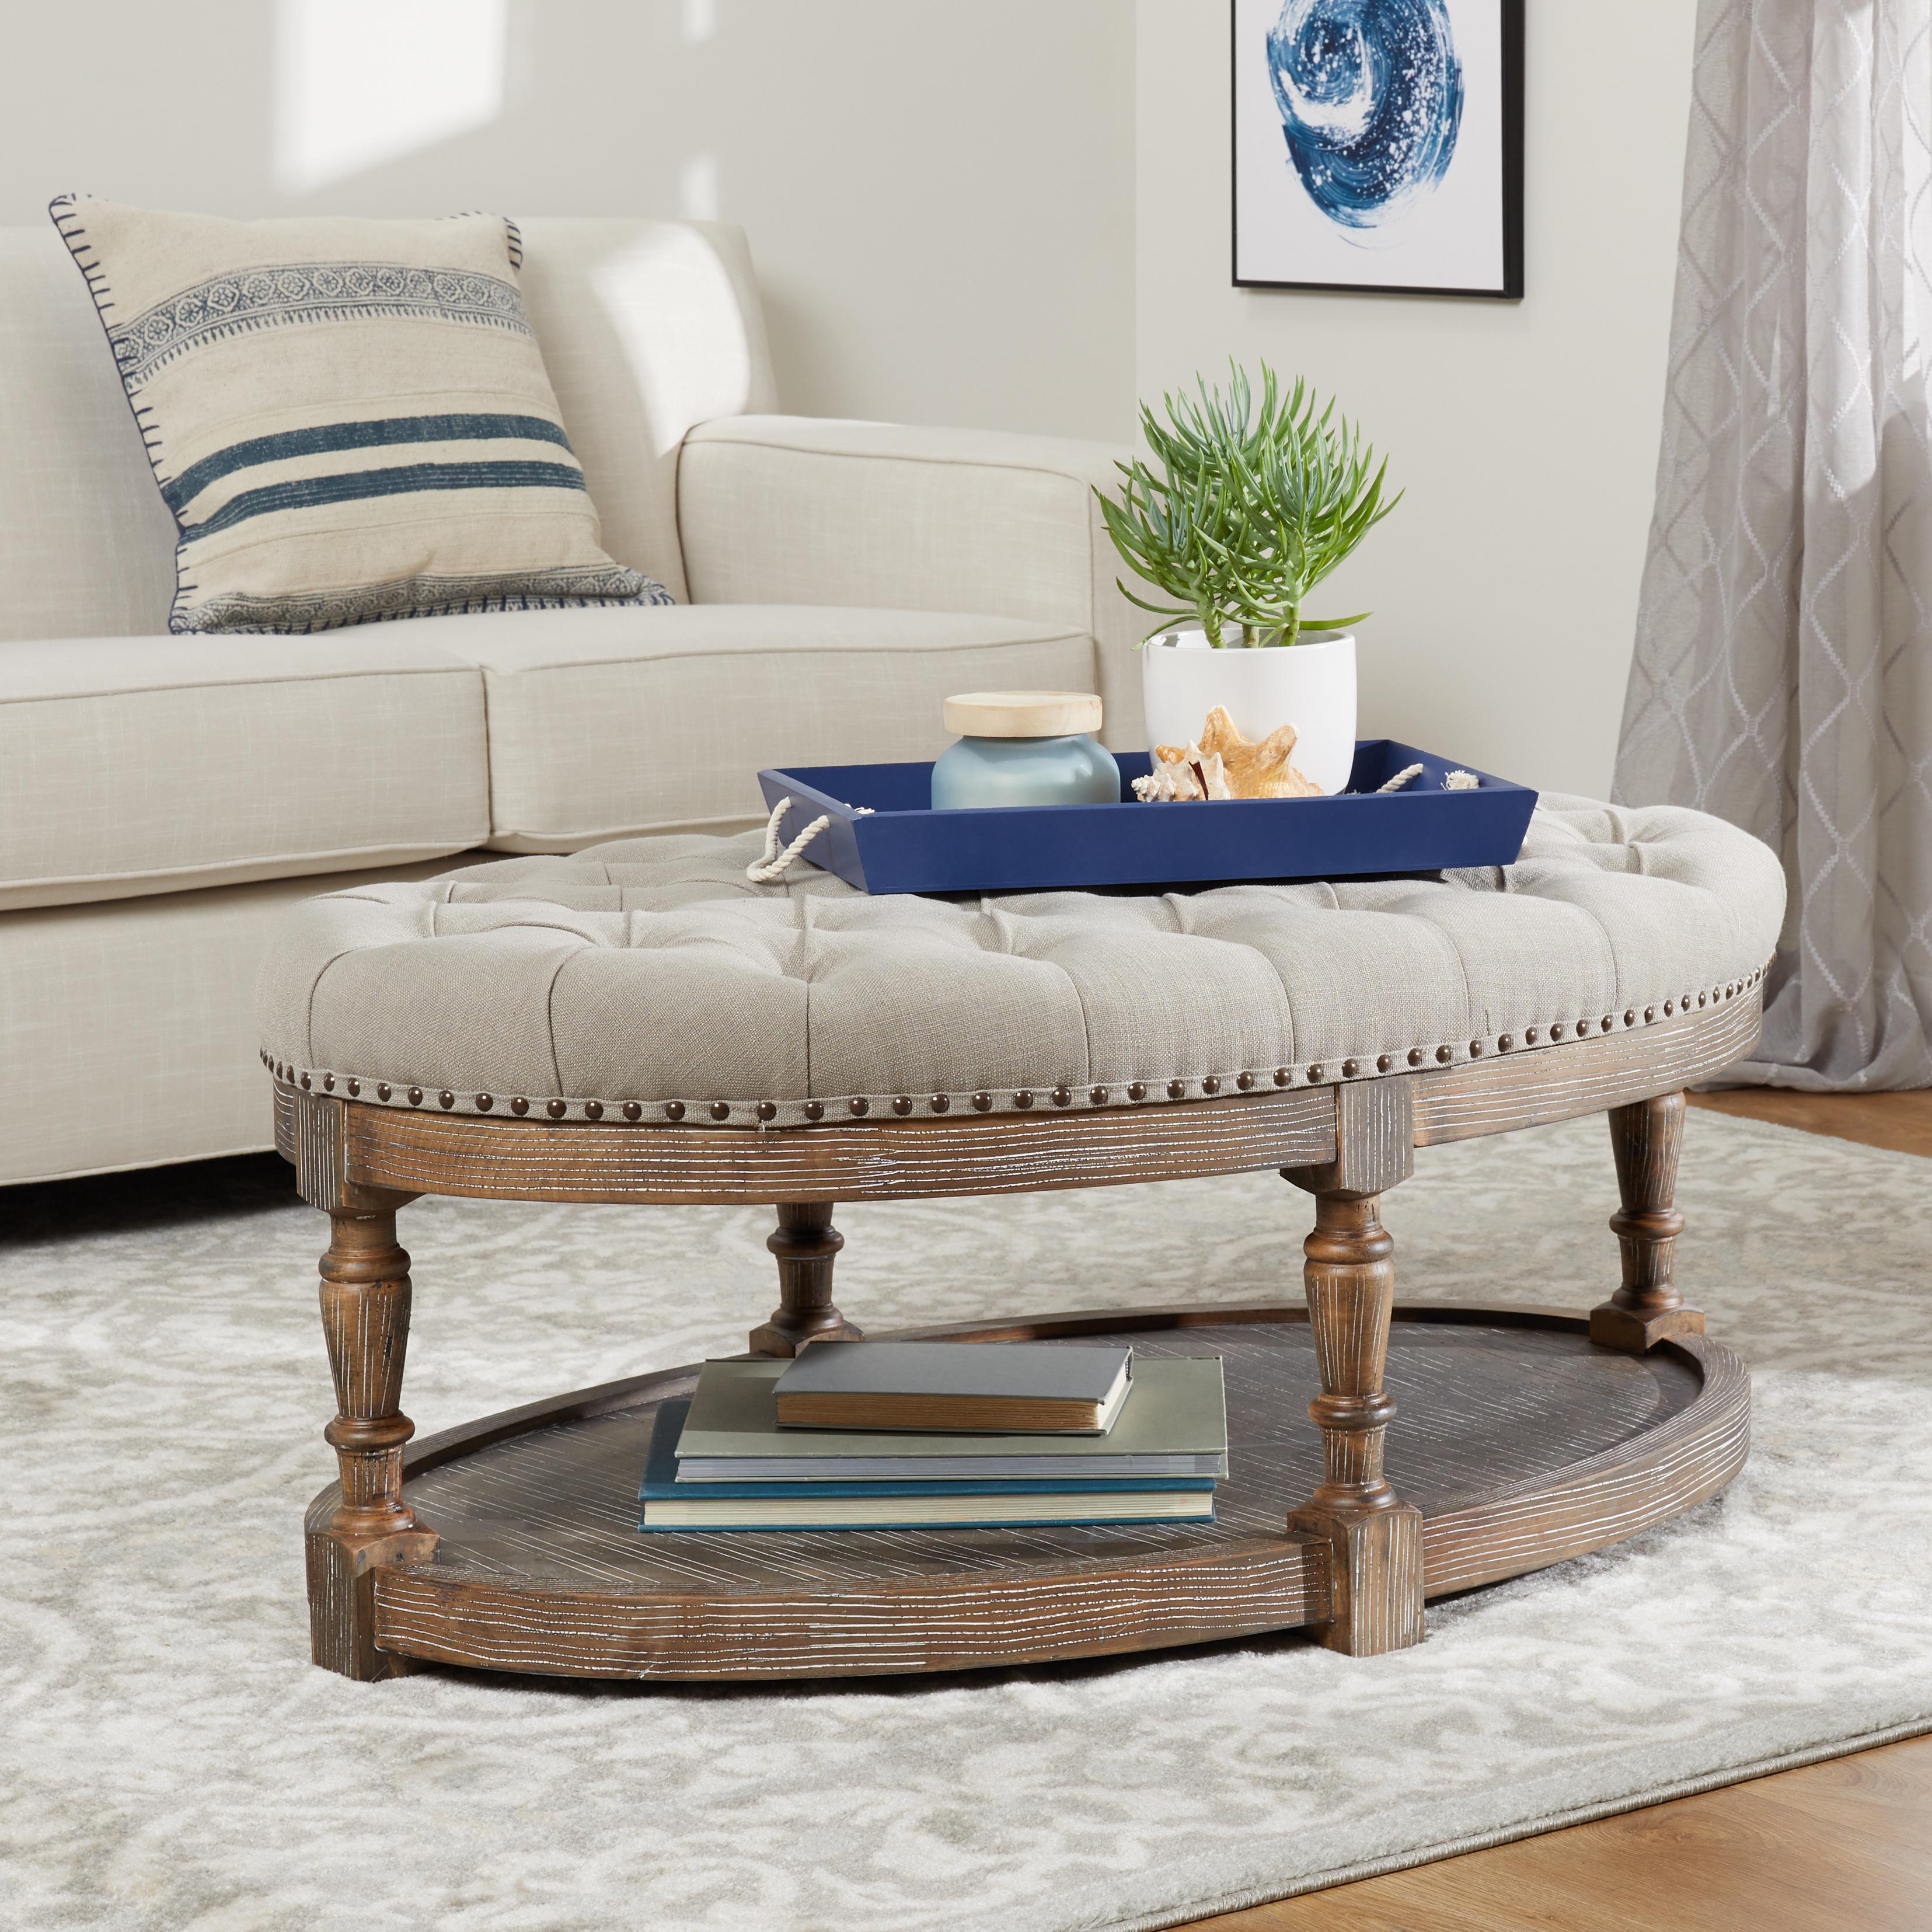 save an extra 10% on Select Living Room Furniture*